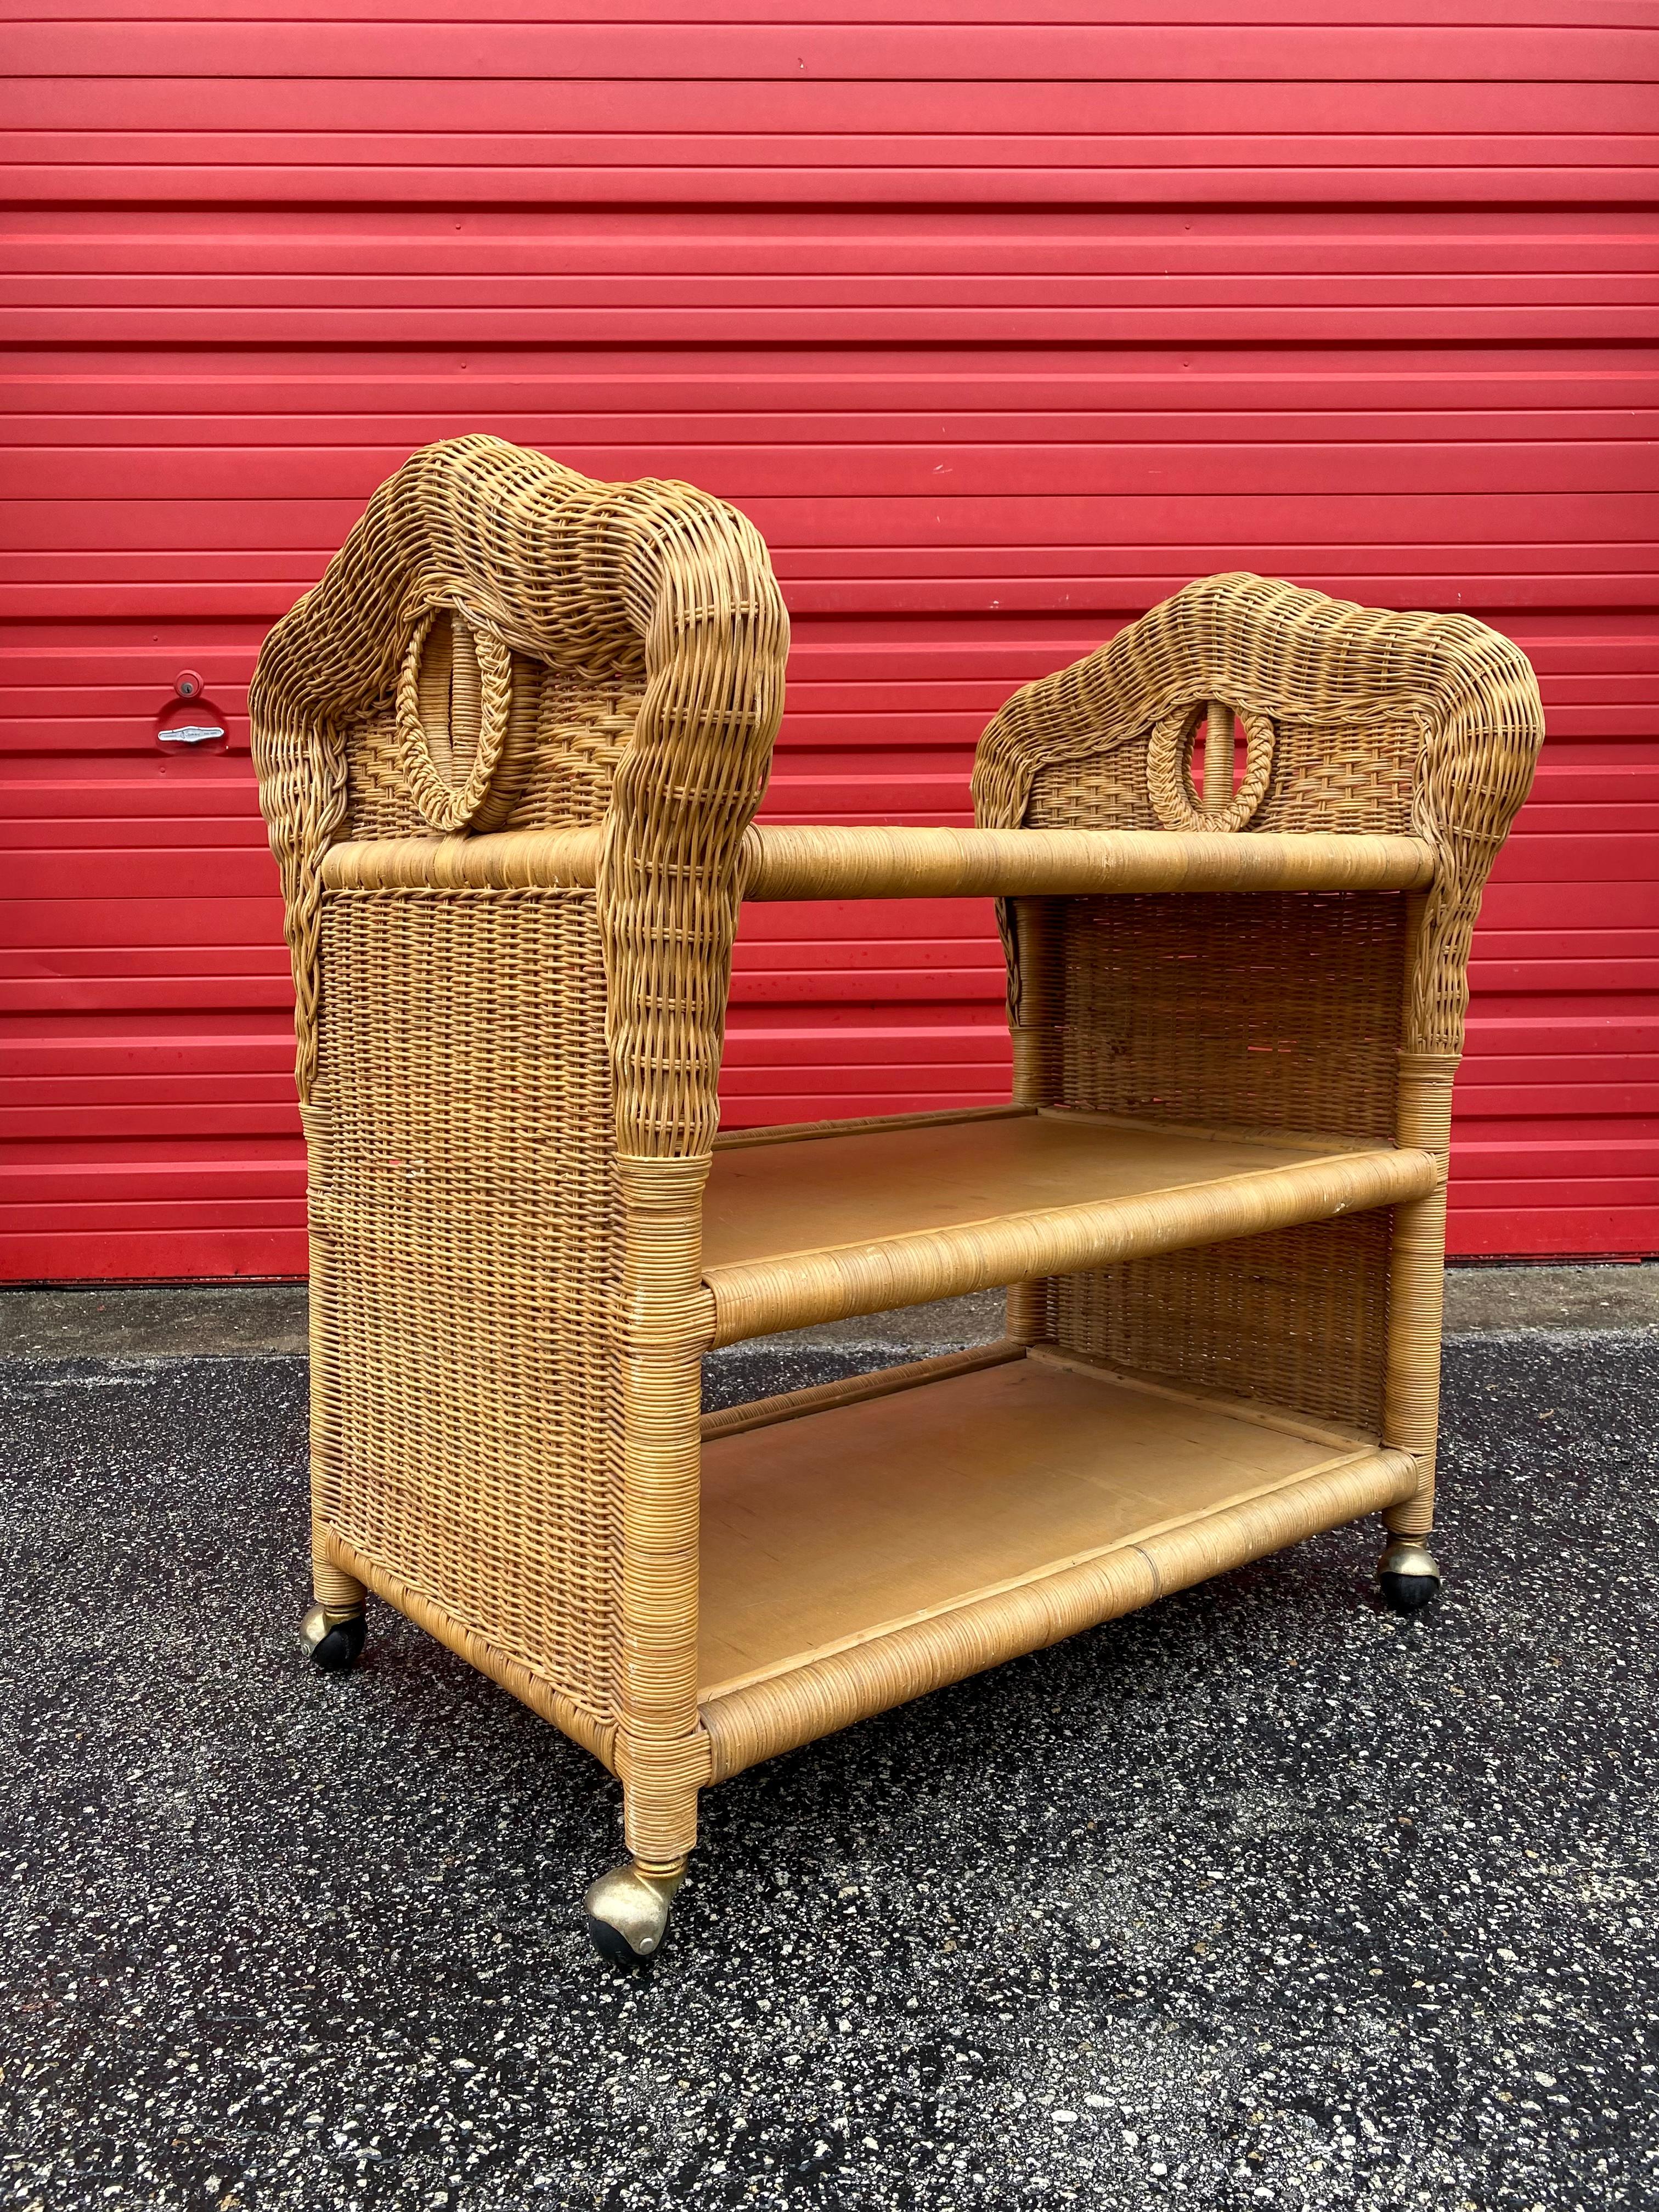 The rare woven sculptural rattan cart is statement piece which is also extremely comfortable and packed with personality! Just look at the gorgeous design on this beauty!  Mid-Century Modern wicker, rattan serving trolley, bar cart or tray table on